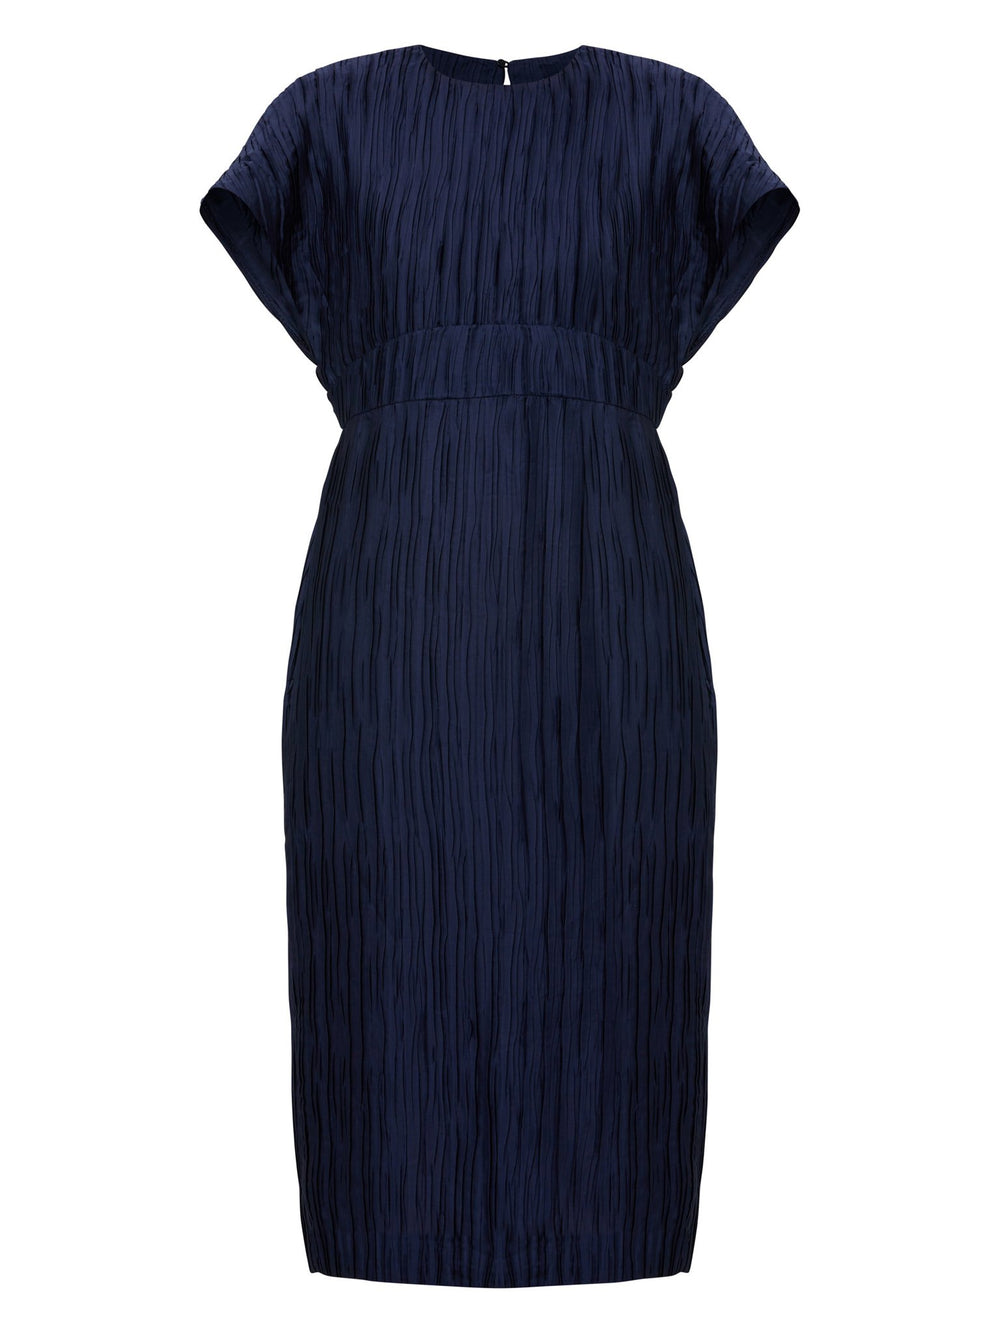 The Elegant Shiv dress redefined in a navy polished pleated fabric. An easy-fitting silhouette that falls to the mid-calf and features a side slit, pockets, and an elegant key-hole back neck detail. . Attending a summer wedding? Mother of the bride? Heading to the races? This is the dress for you.